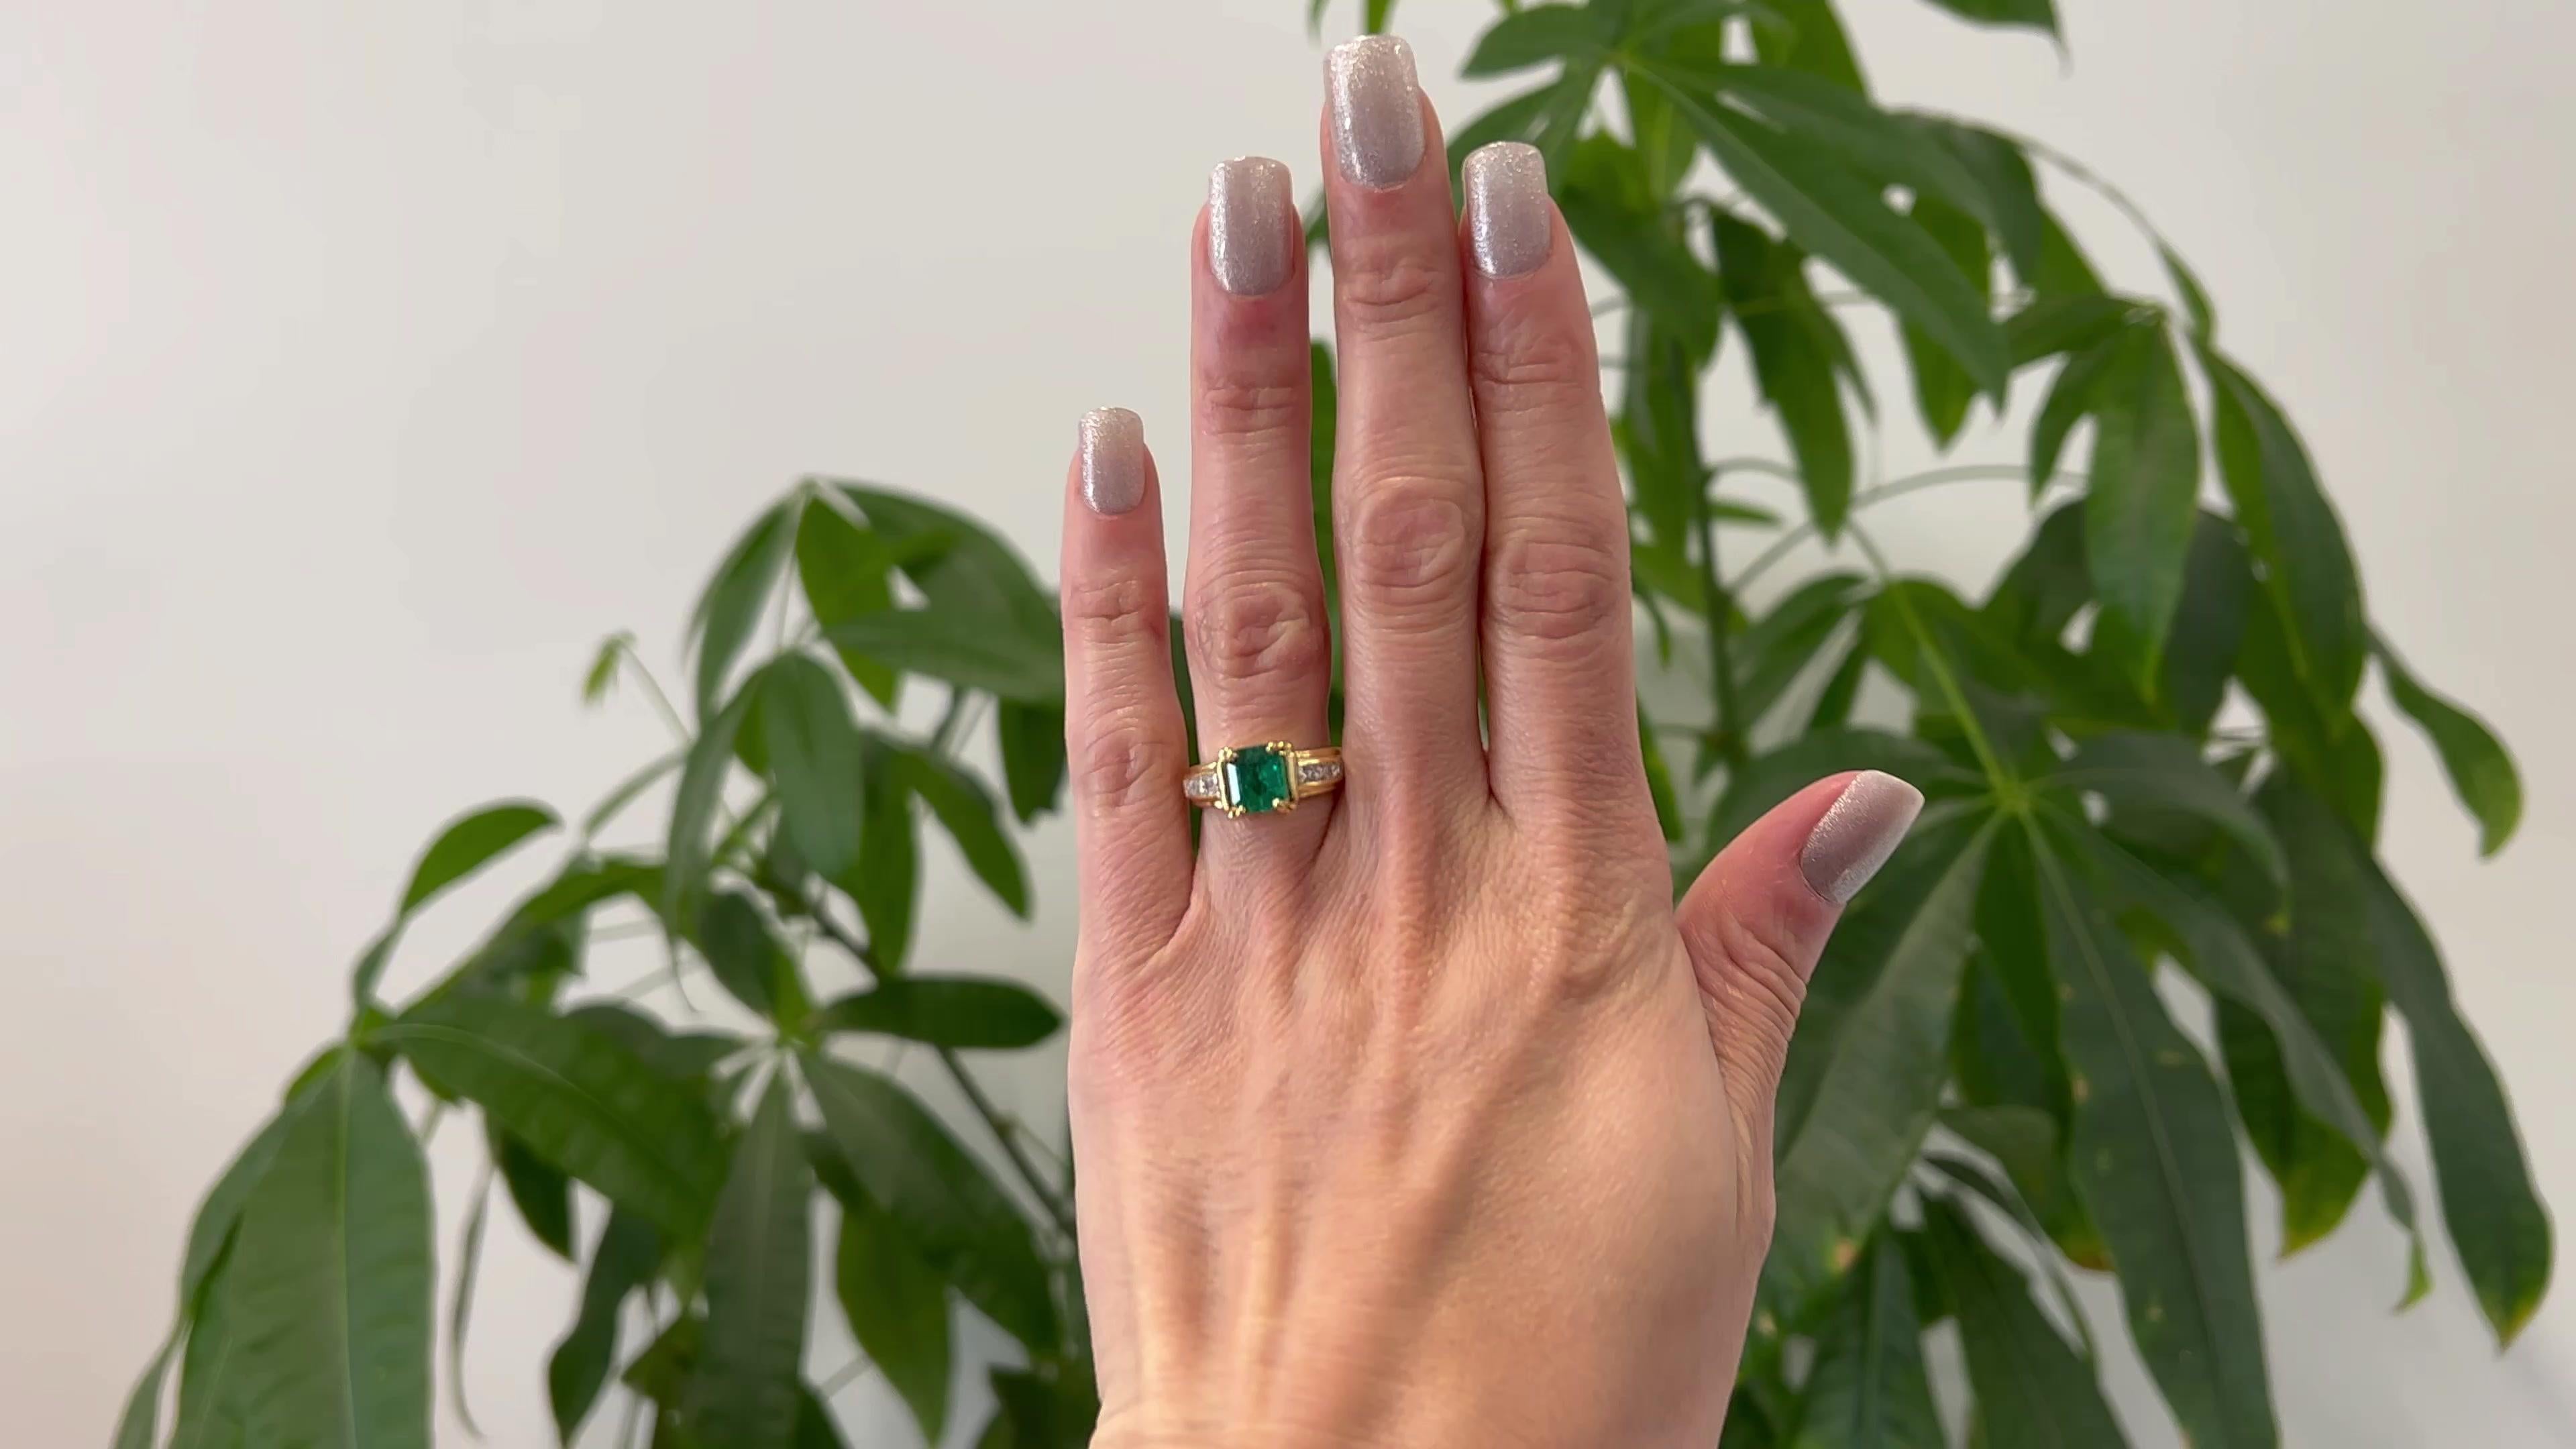 One Vintage GIA Colombian Emerald and Diamond 18k Yellow Gold Ring. Featuring one GIA octagonal step cut emerald weighing approximately 1.25 carats, accompanied with GIA #5221947032 stating the emerald is of Colombian origin. Accented by six